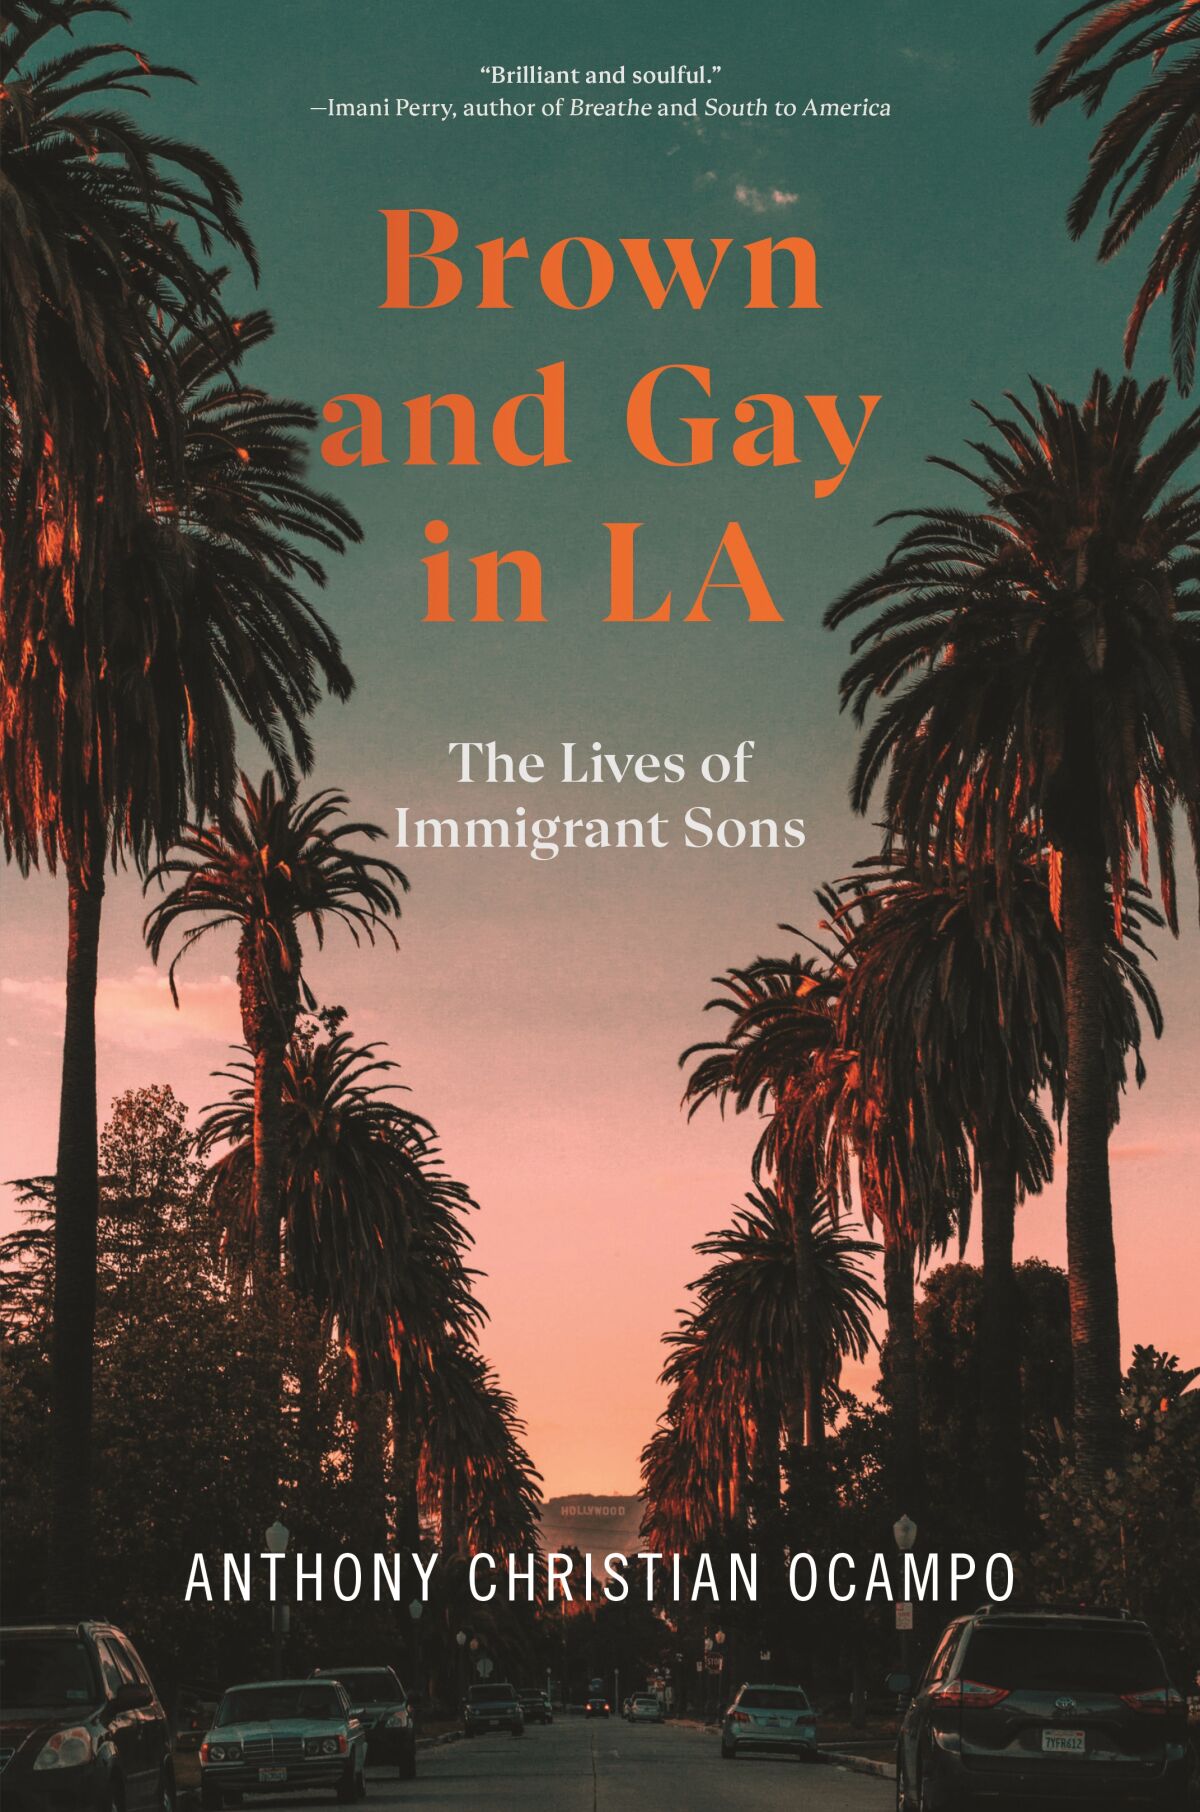 "Brown and gay in LA," by Anthony Christian Ocampo